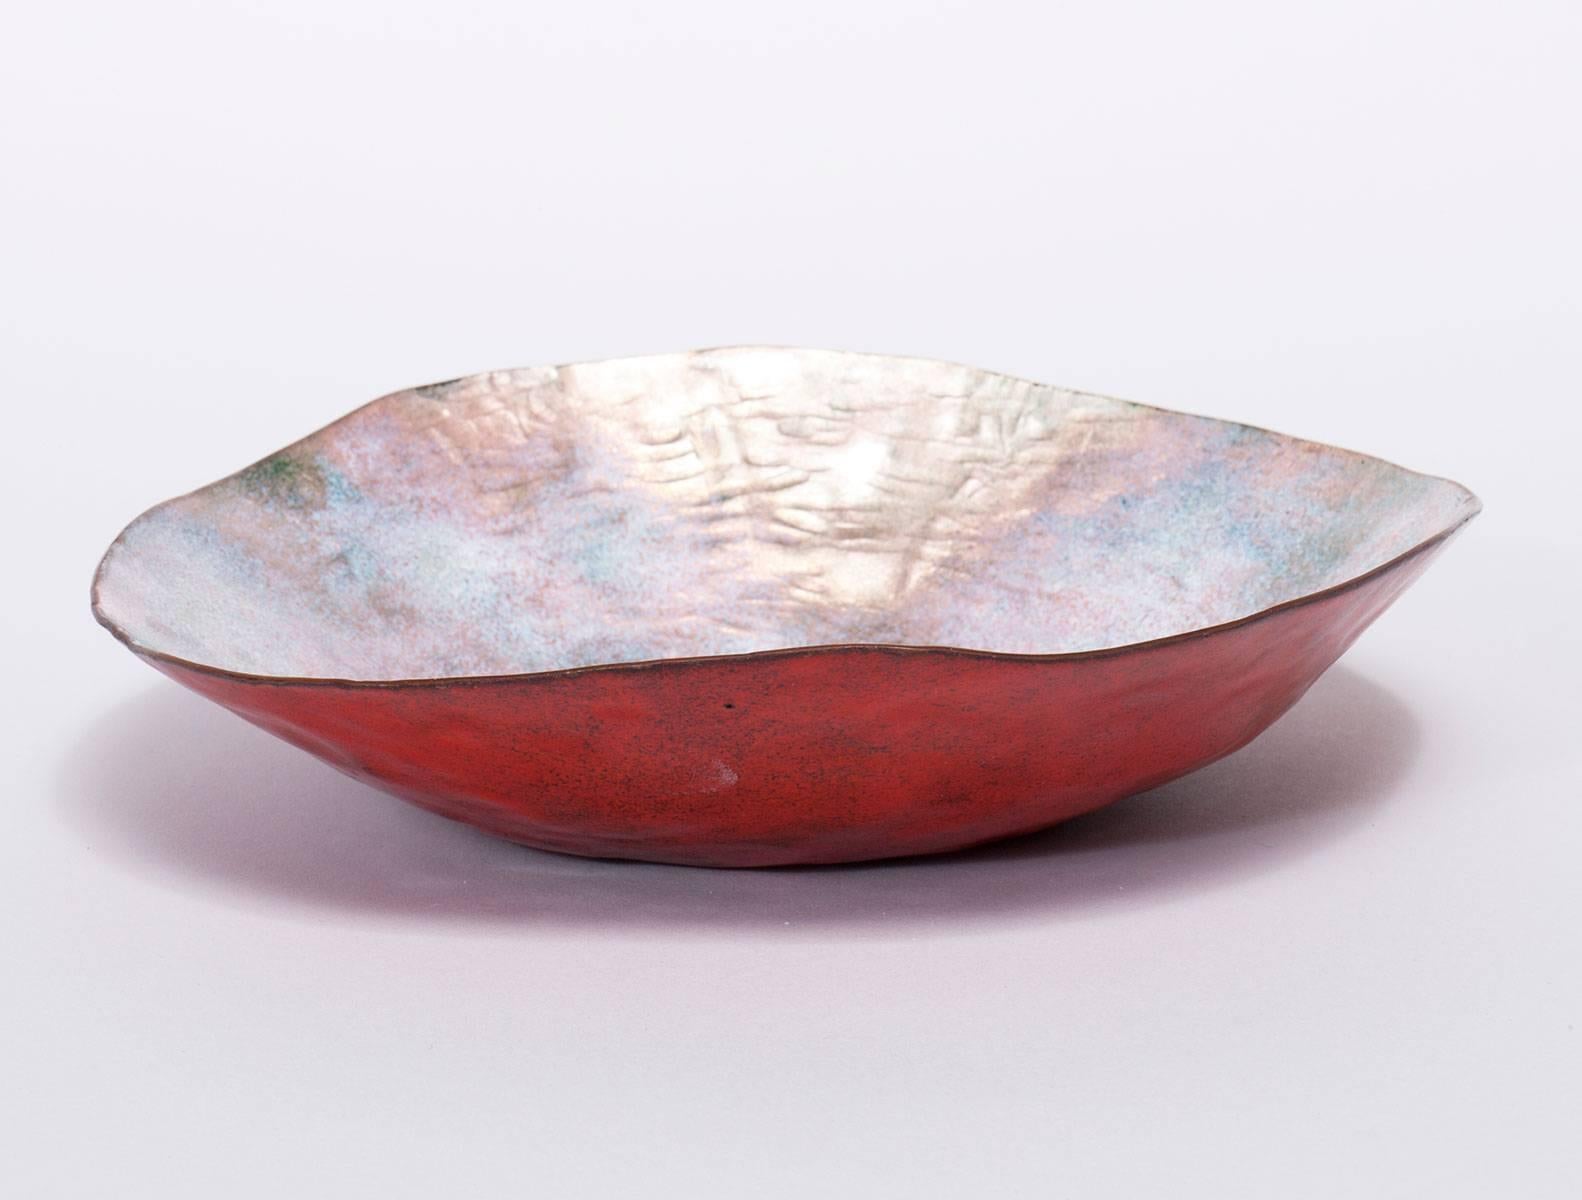 Beautiful coral colored enamel over copper low bowl with pearlized interior, designed and executed by Paolo De Poli, circa 1950s. Signed with sterling silver plaque.